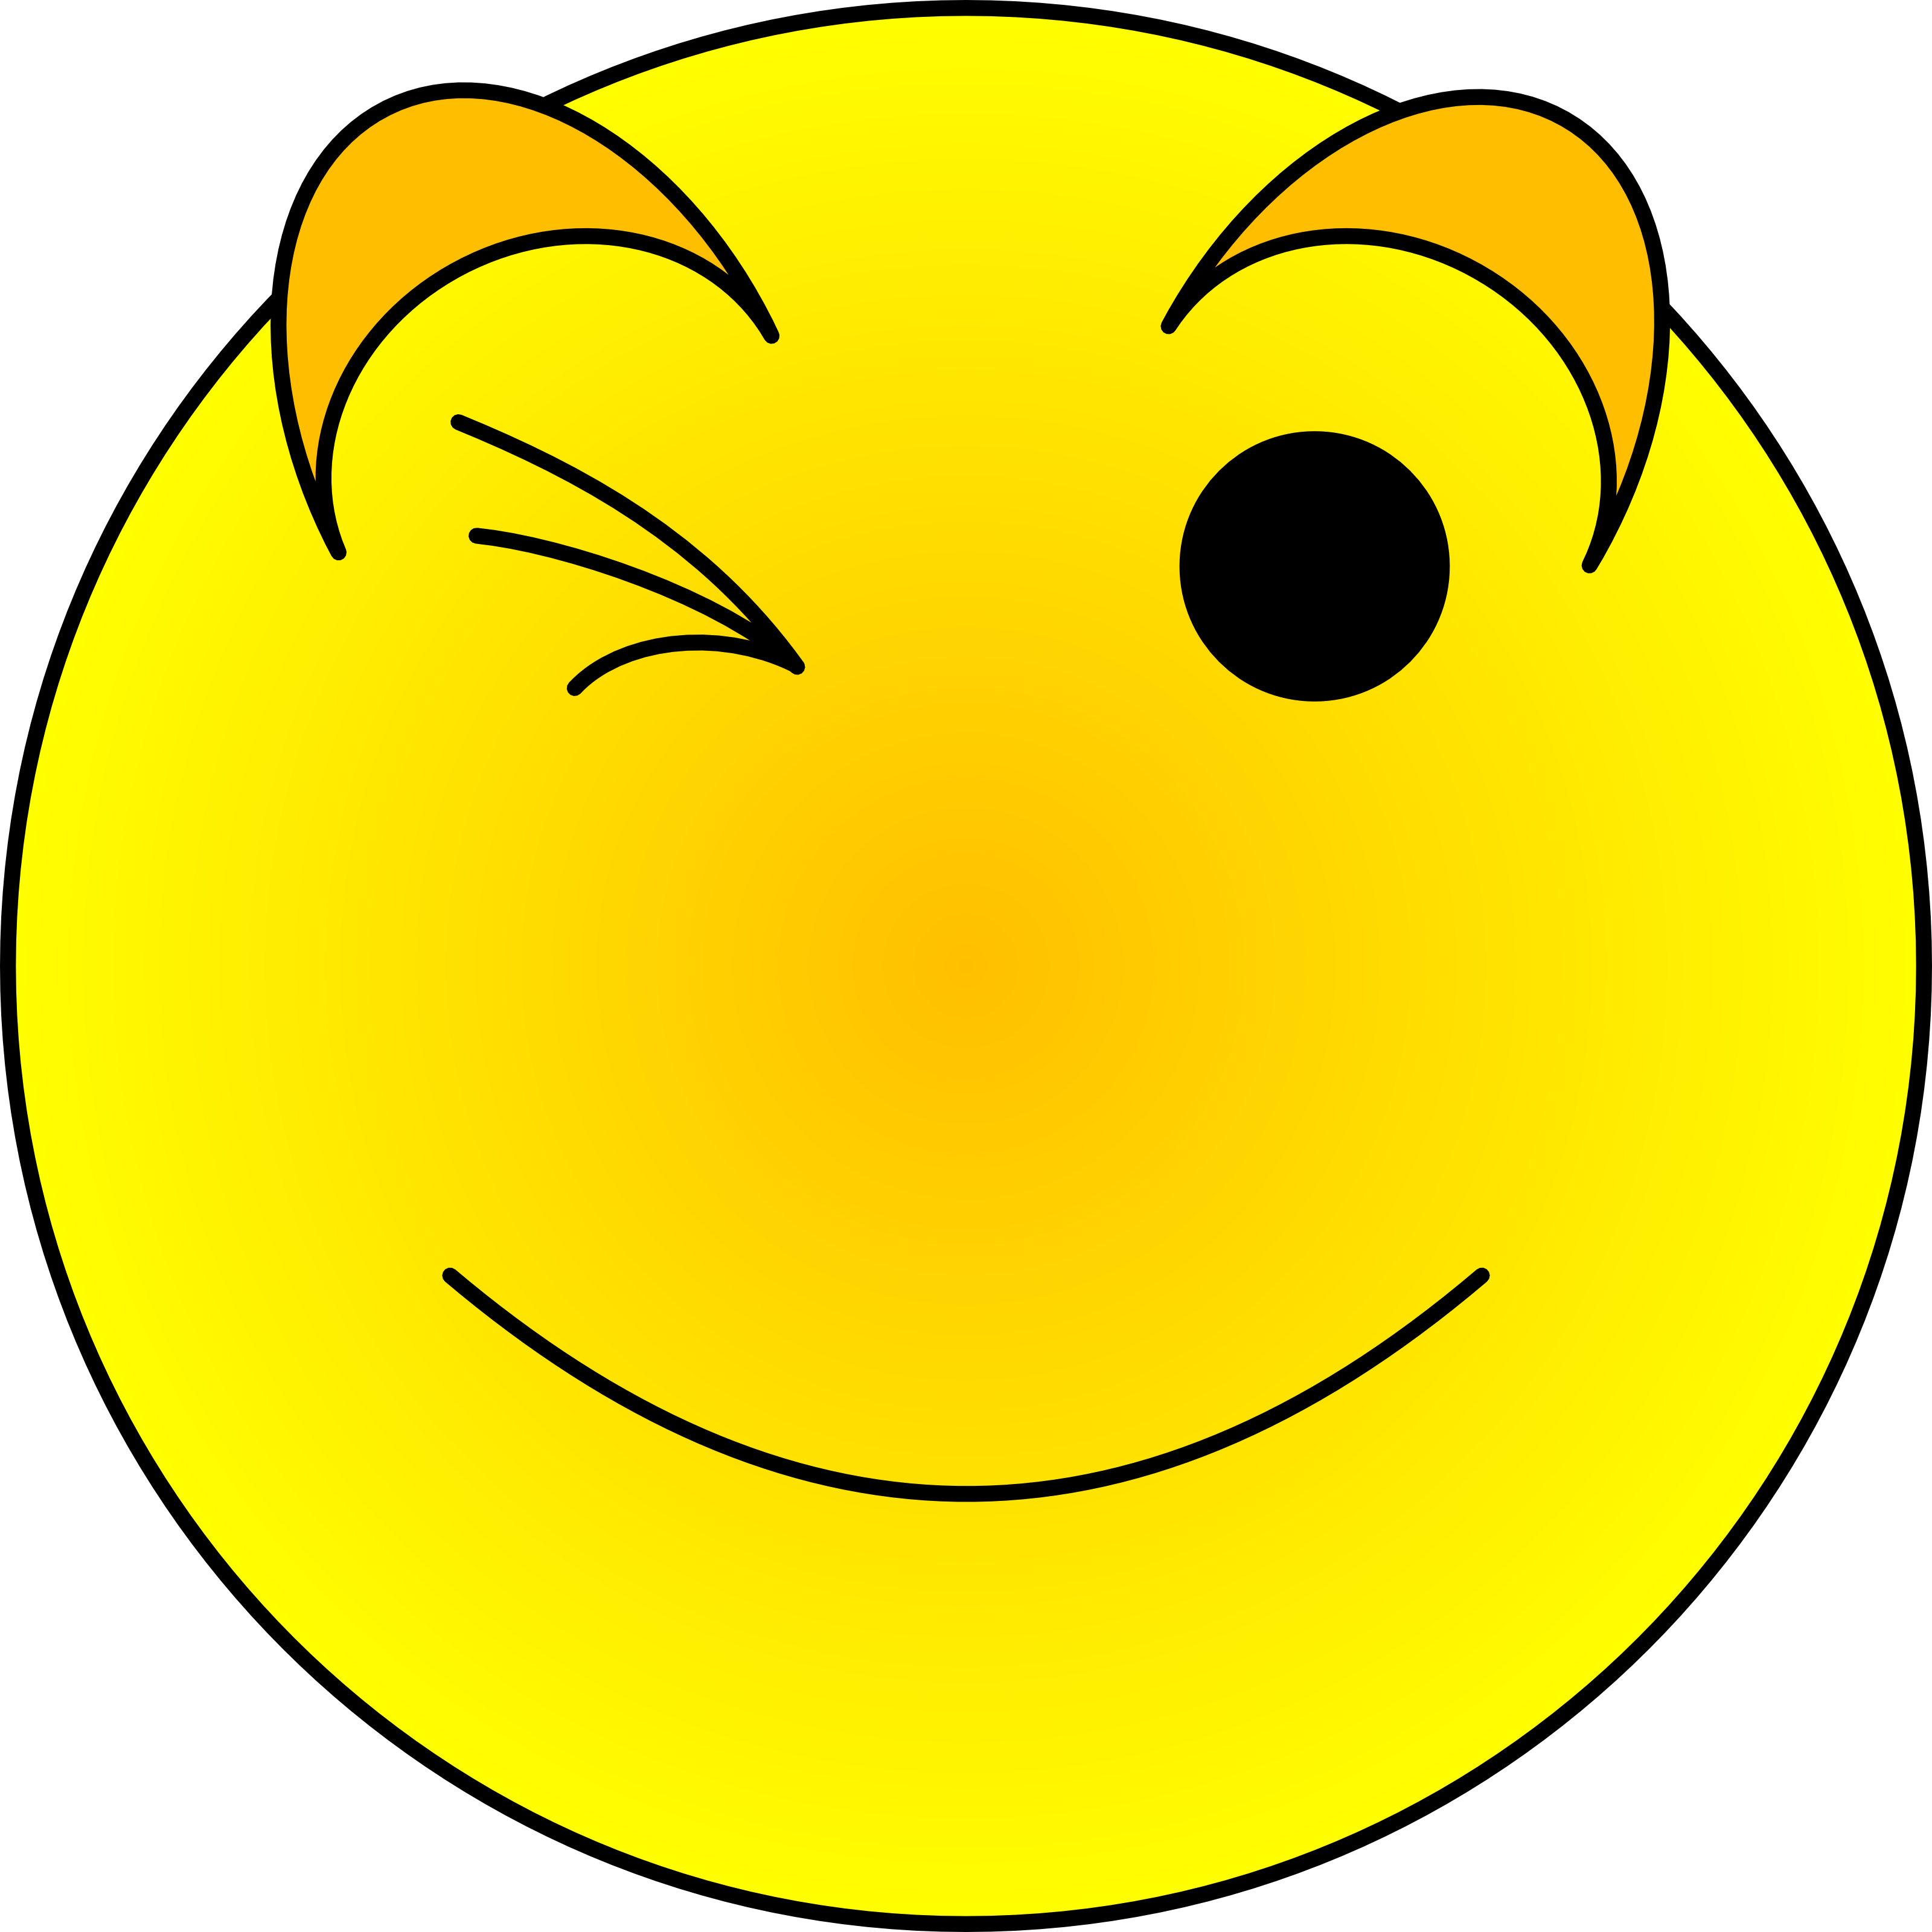 clipart images smiley faces - photo #39